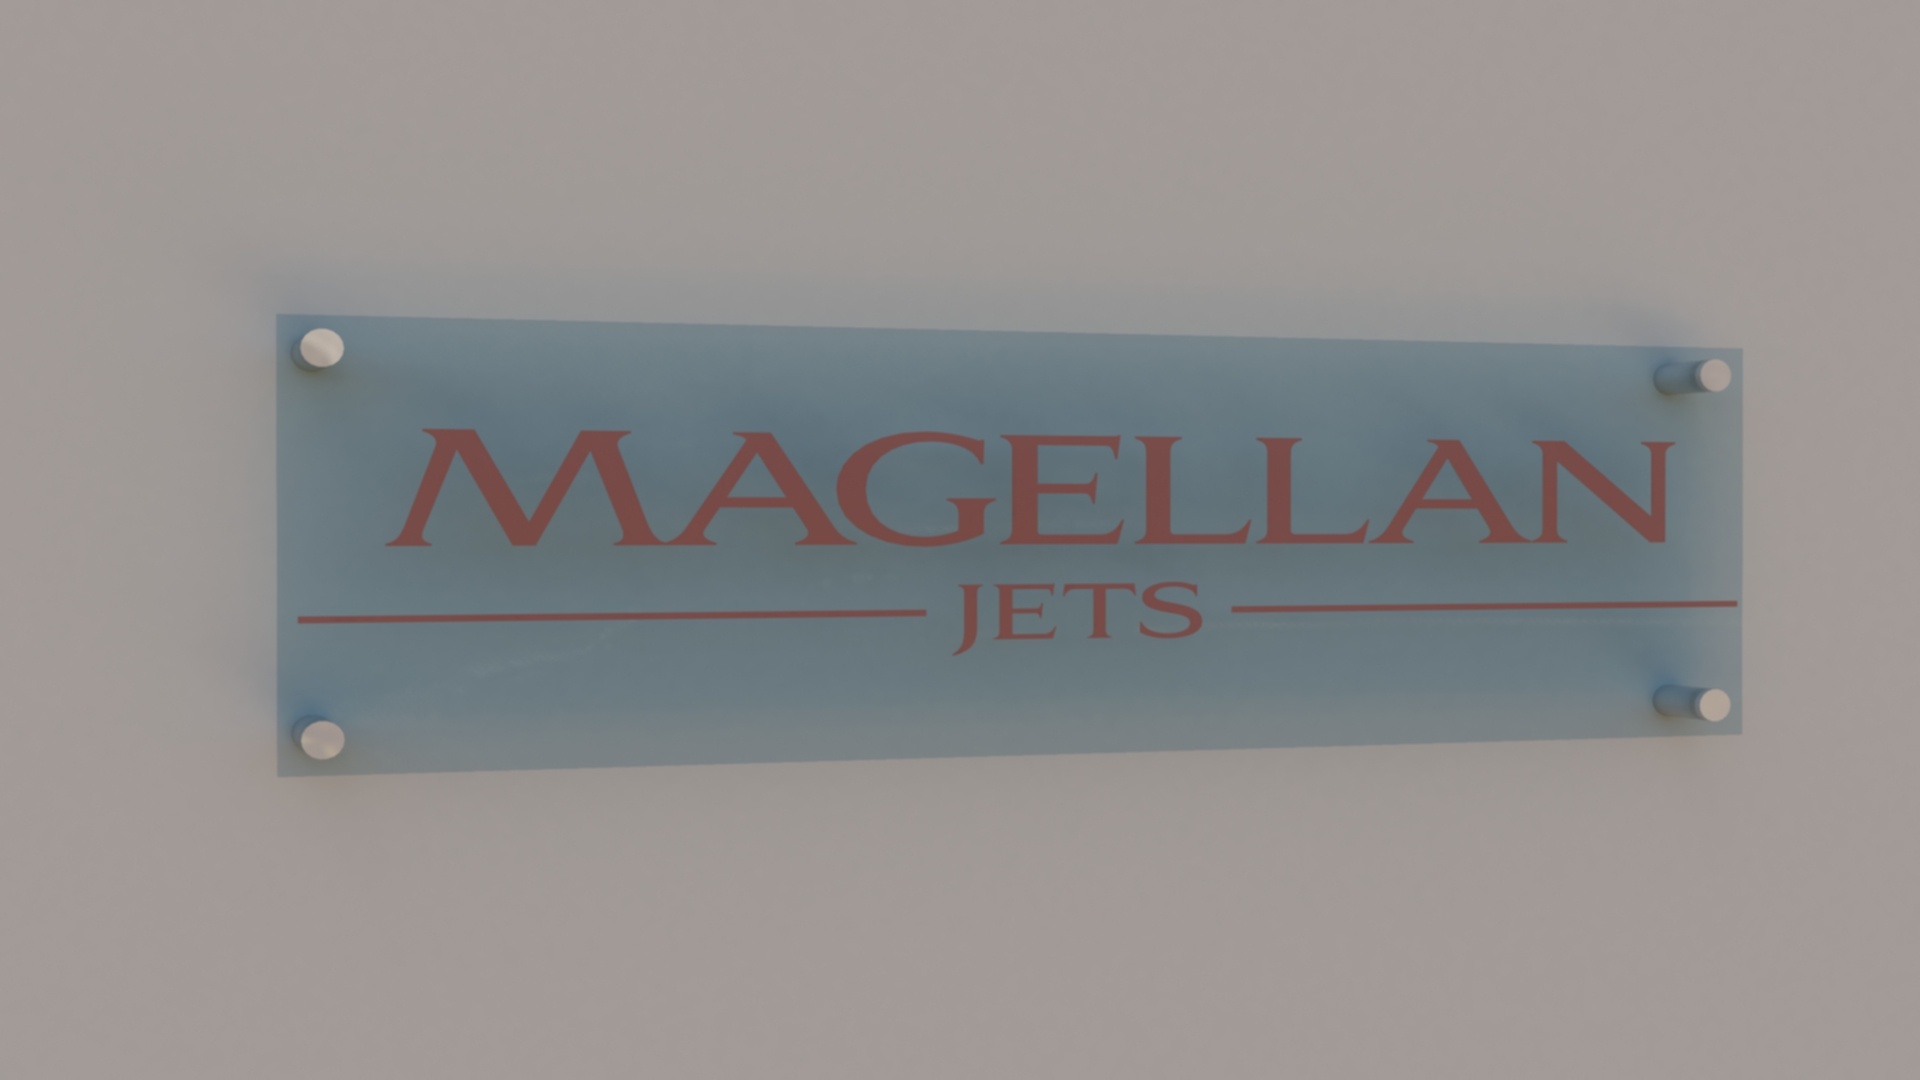 Magellan Jets Chooses Acrylic Office Sign